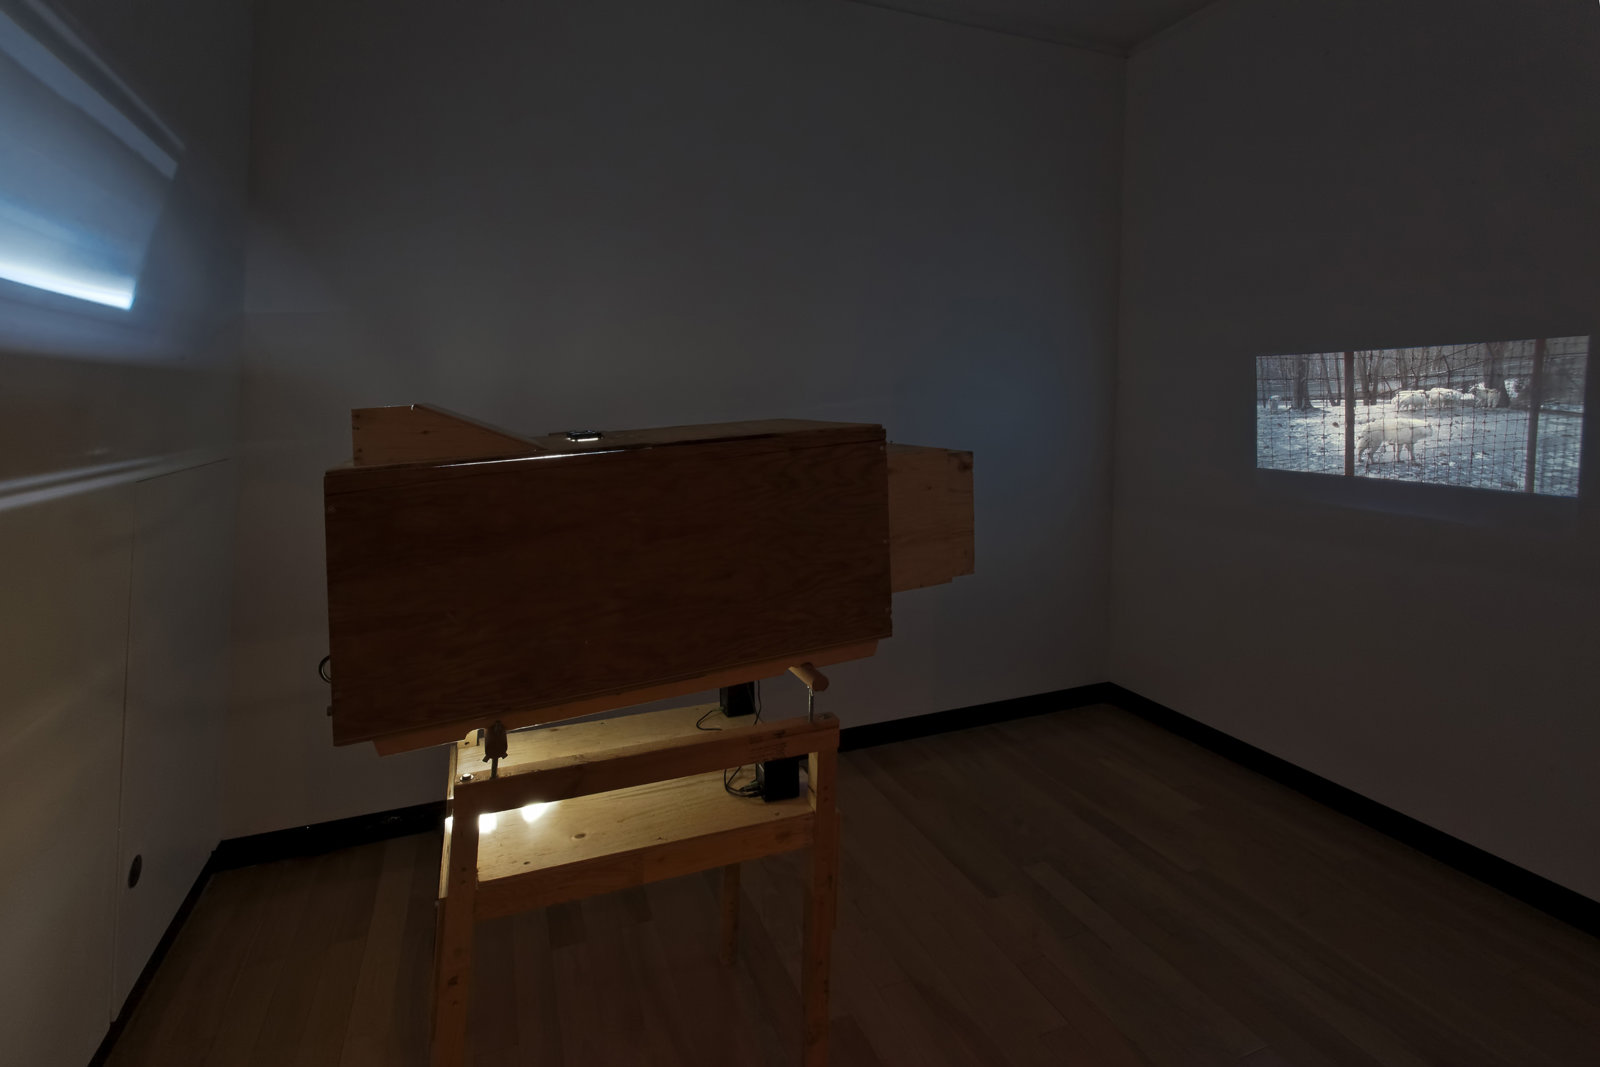 Kevin Schmidt, Sad Wolf, 2006, custom-made HD video projector, 48 x 24 x 48 in. (122 x 61 x 122 cm), HD video, 4 minutes, 11 seconds. Installation view, Don't Stop Believing,	Justina M. Barnicke Gallery, Toronto, 2011